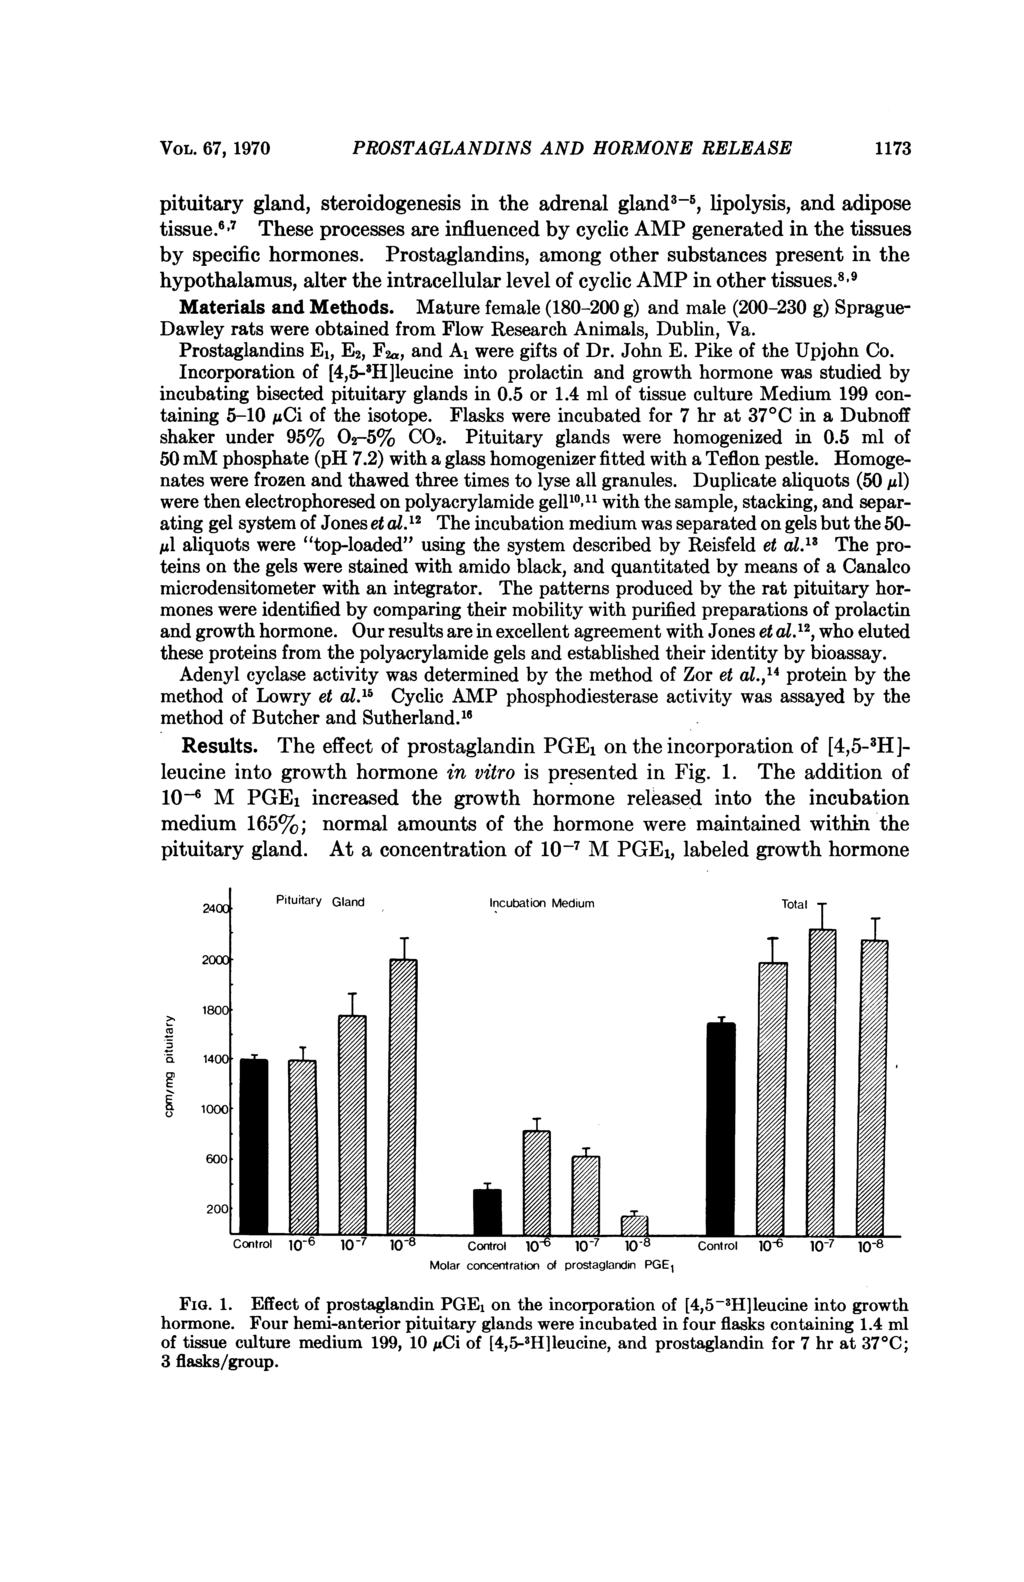 VOL. 67, 1970 PROSTAGLANDINS AND HORMONE RELEASE 1173 pituitary gland, steroidogenesis in the adrenal gland35, lipolysis, and adipose tissue.